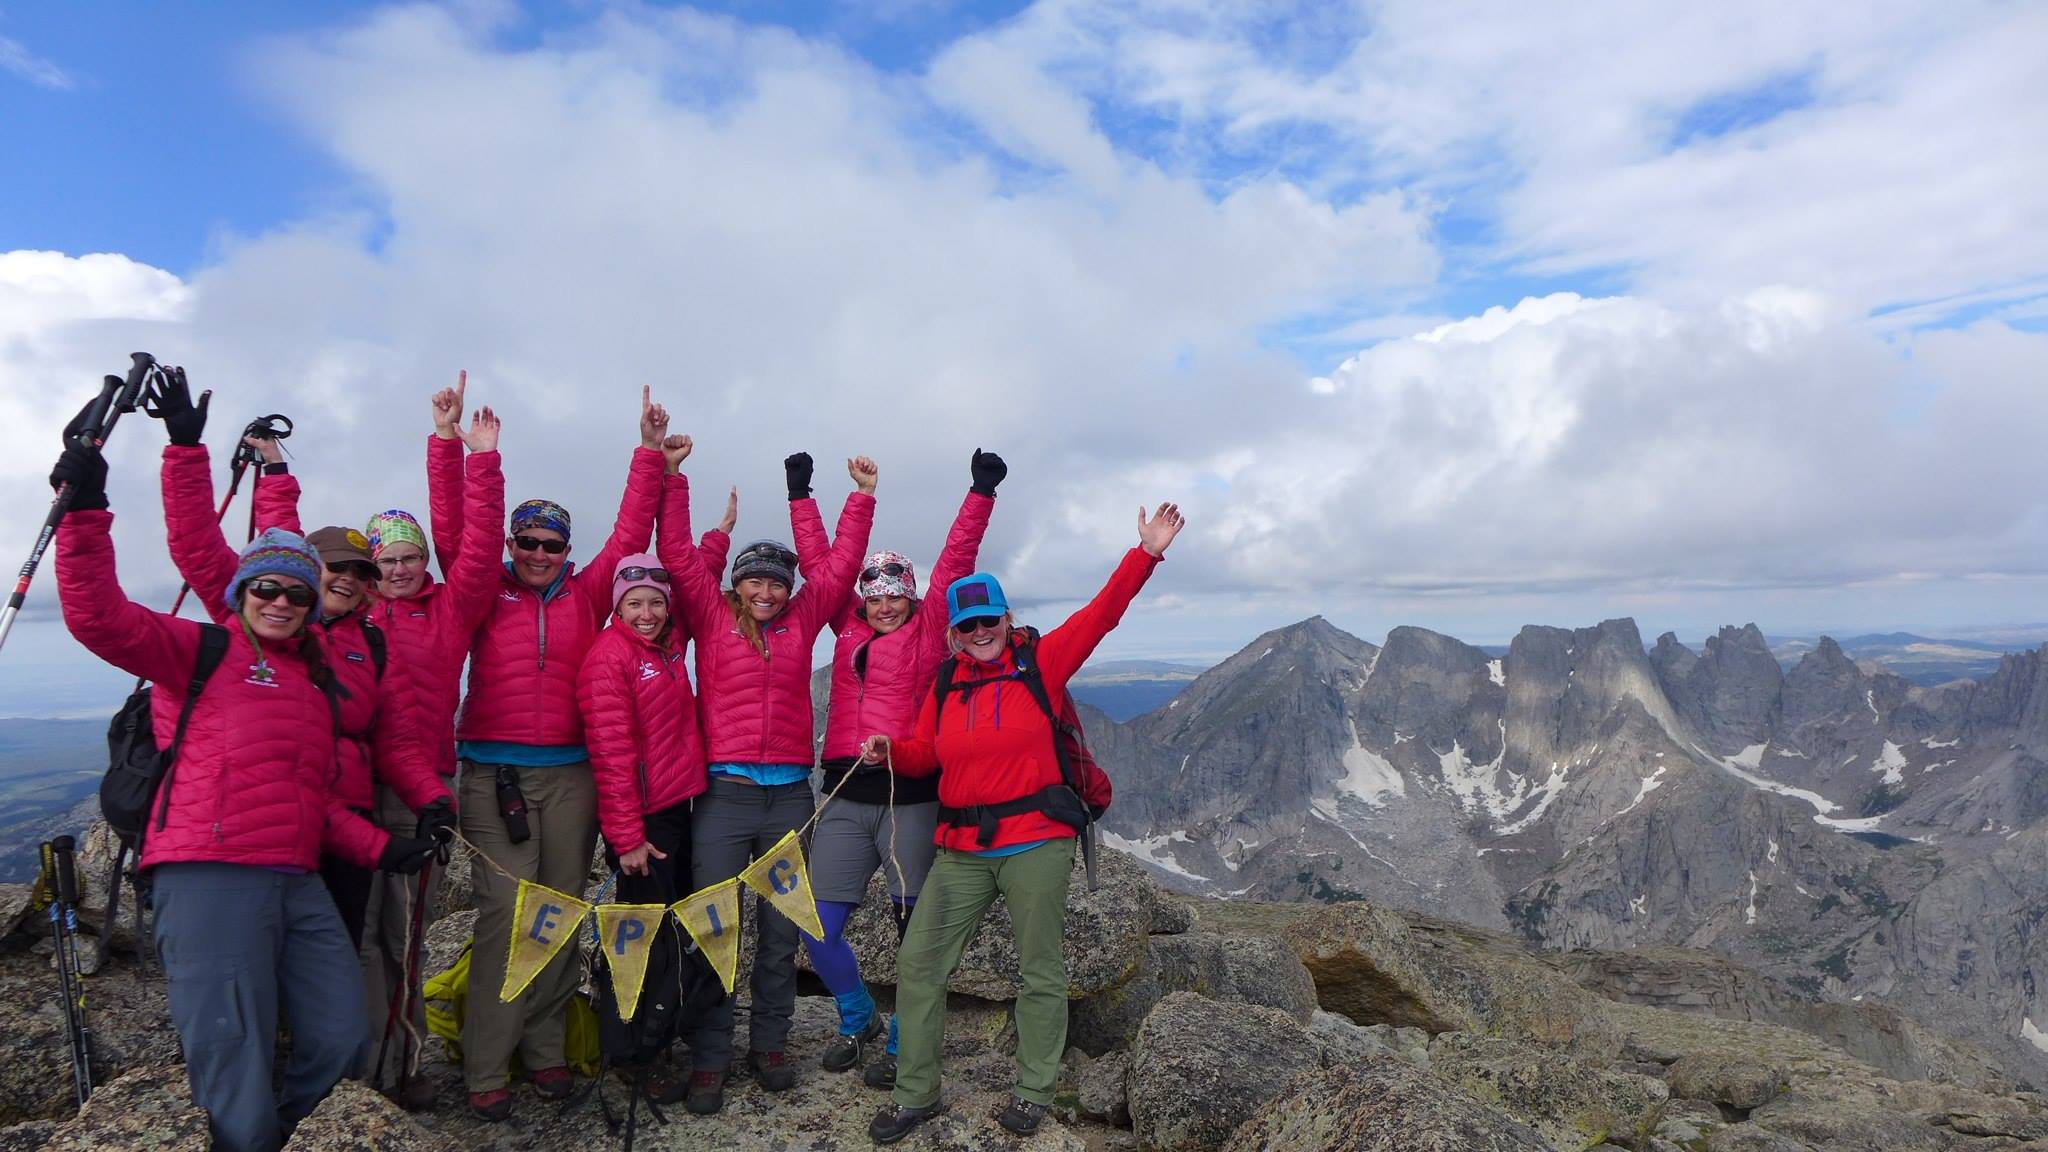 My Epic Women group, atop Mitchell Peak, in 2014.